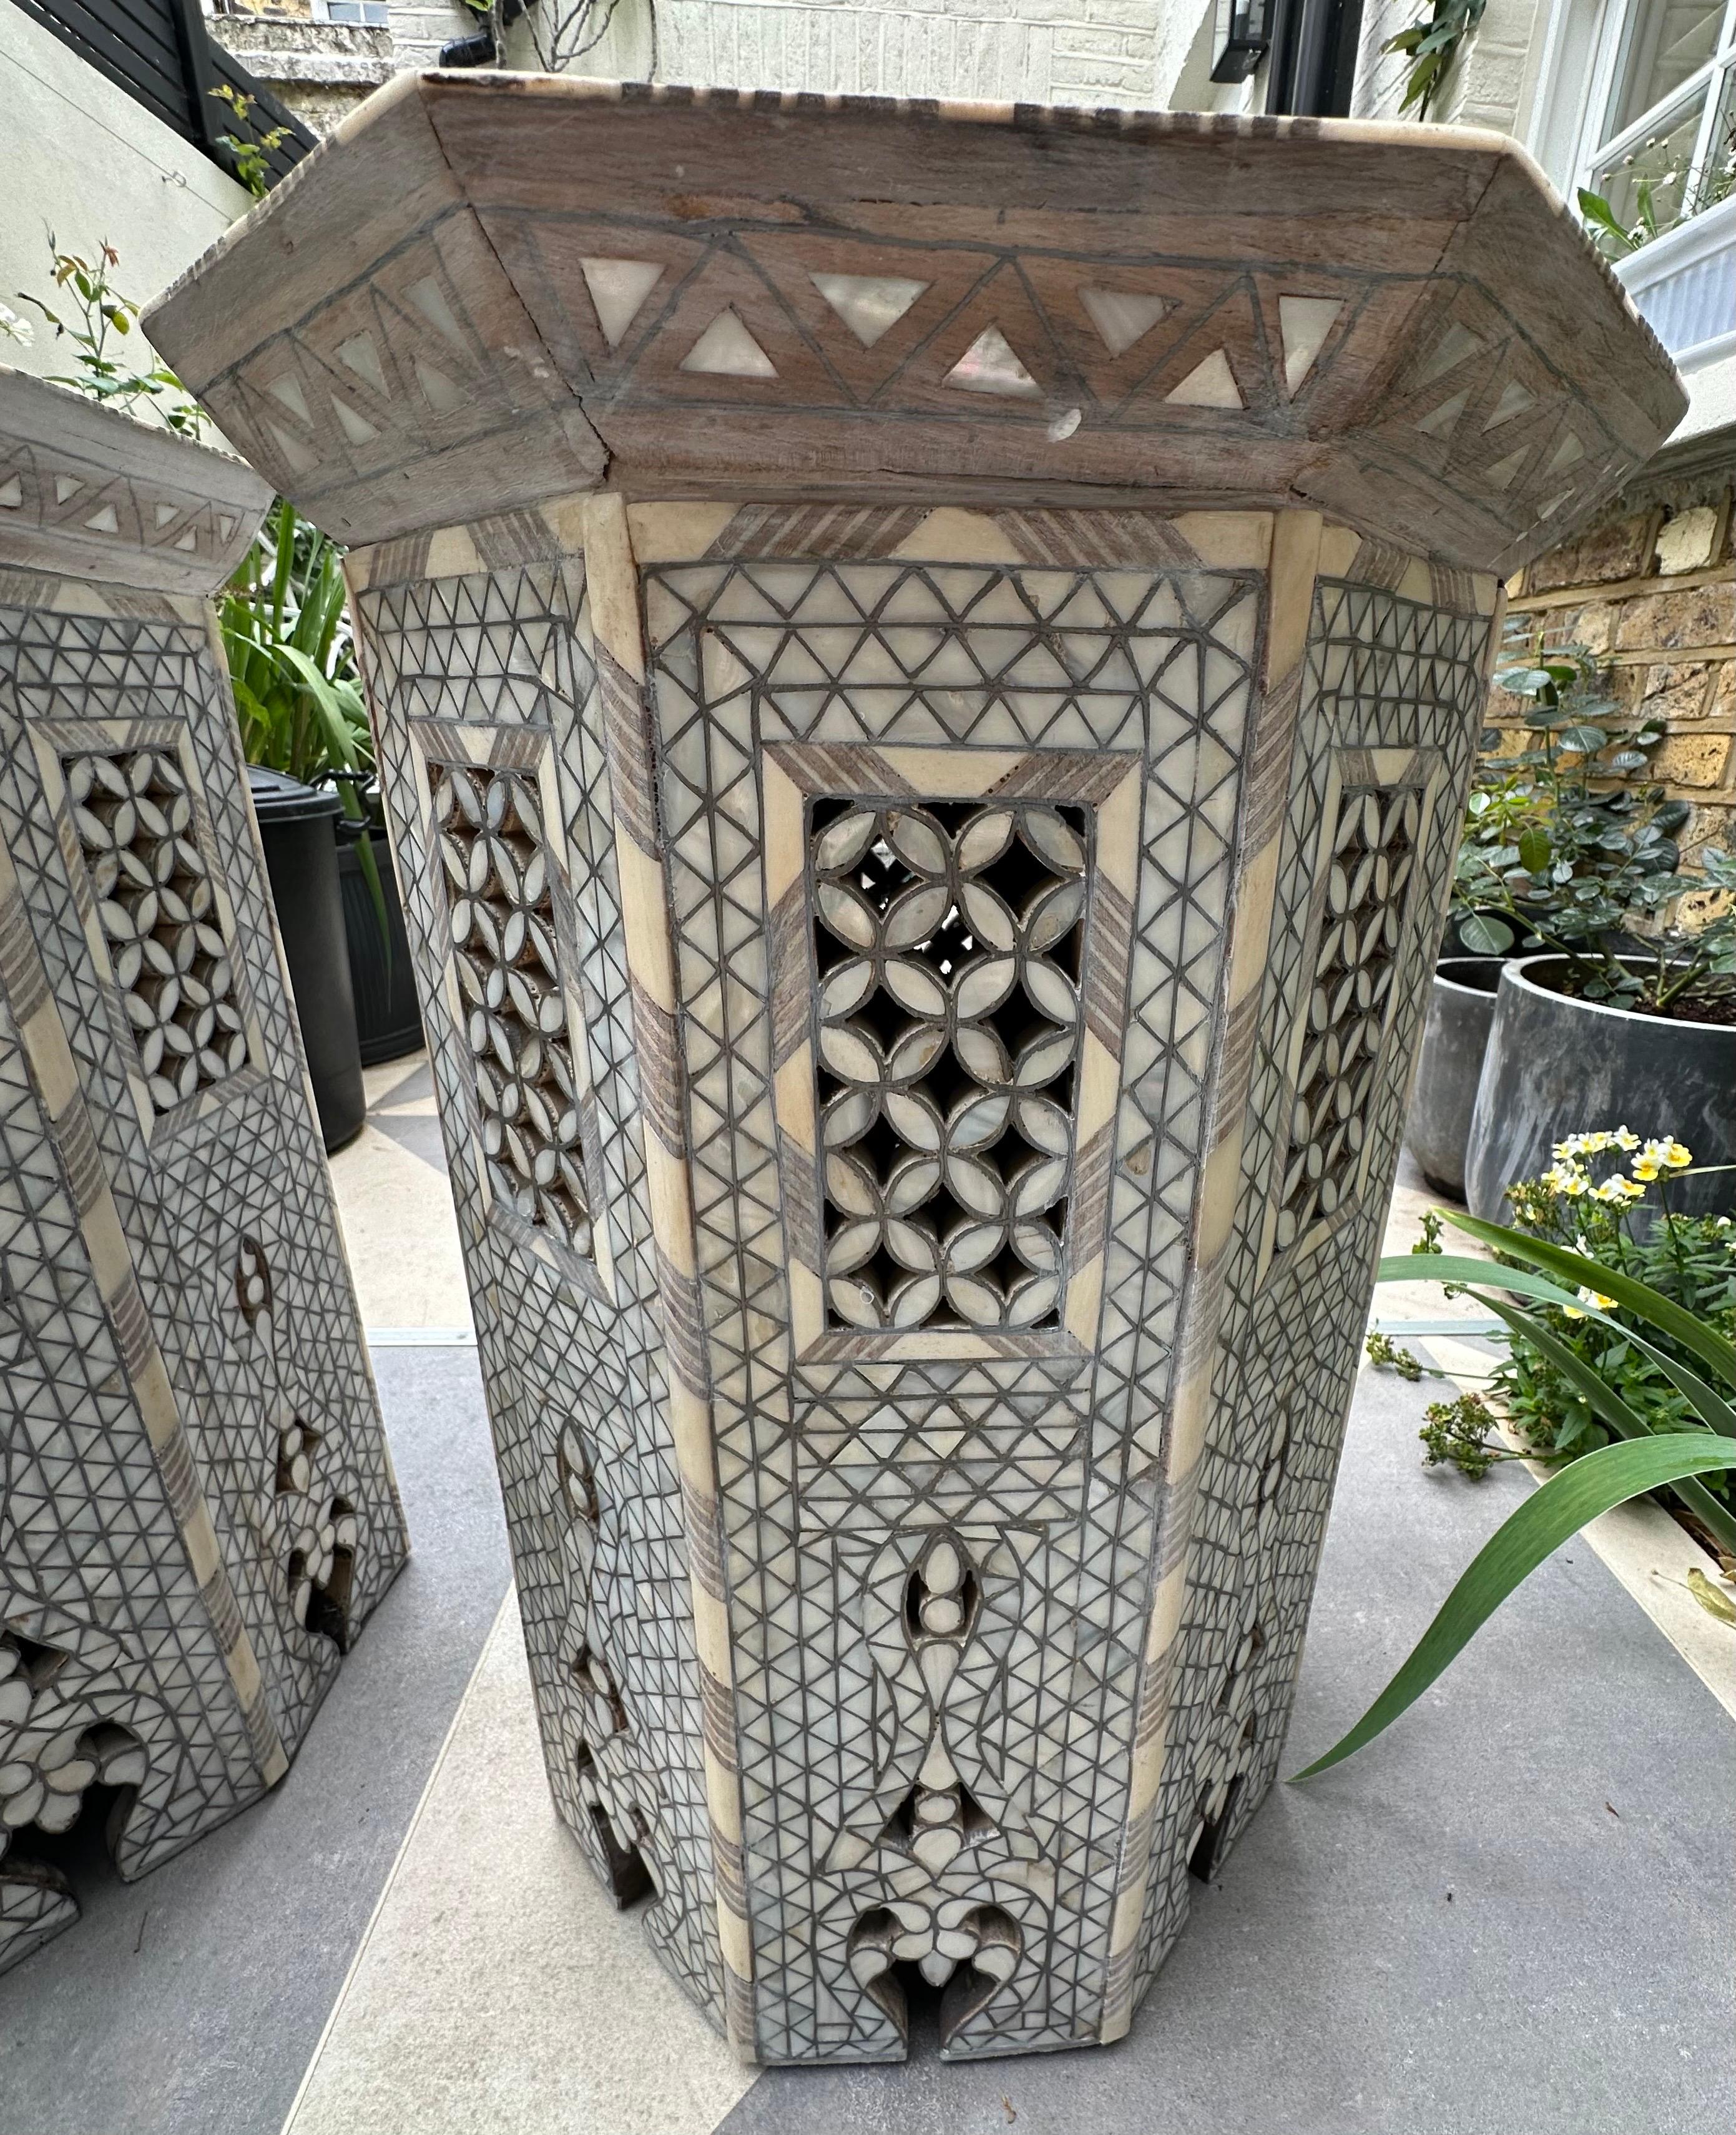 Beautiful and rare pair of Syrian tables, inlaid with mother of pearl in geometric patterns. All inlay is in tact with no missing pieces.
Perfect for a variety of interiors, as an occasional table in a living room or bedroom side table. Would suit